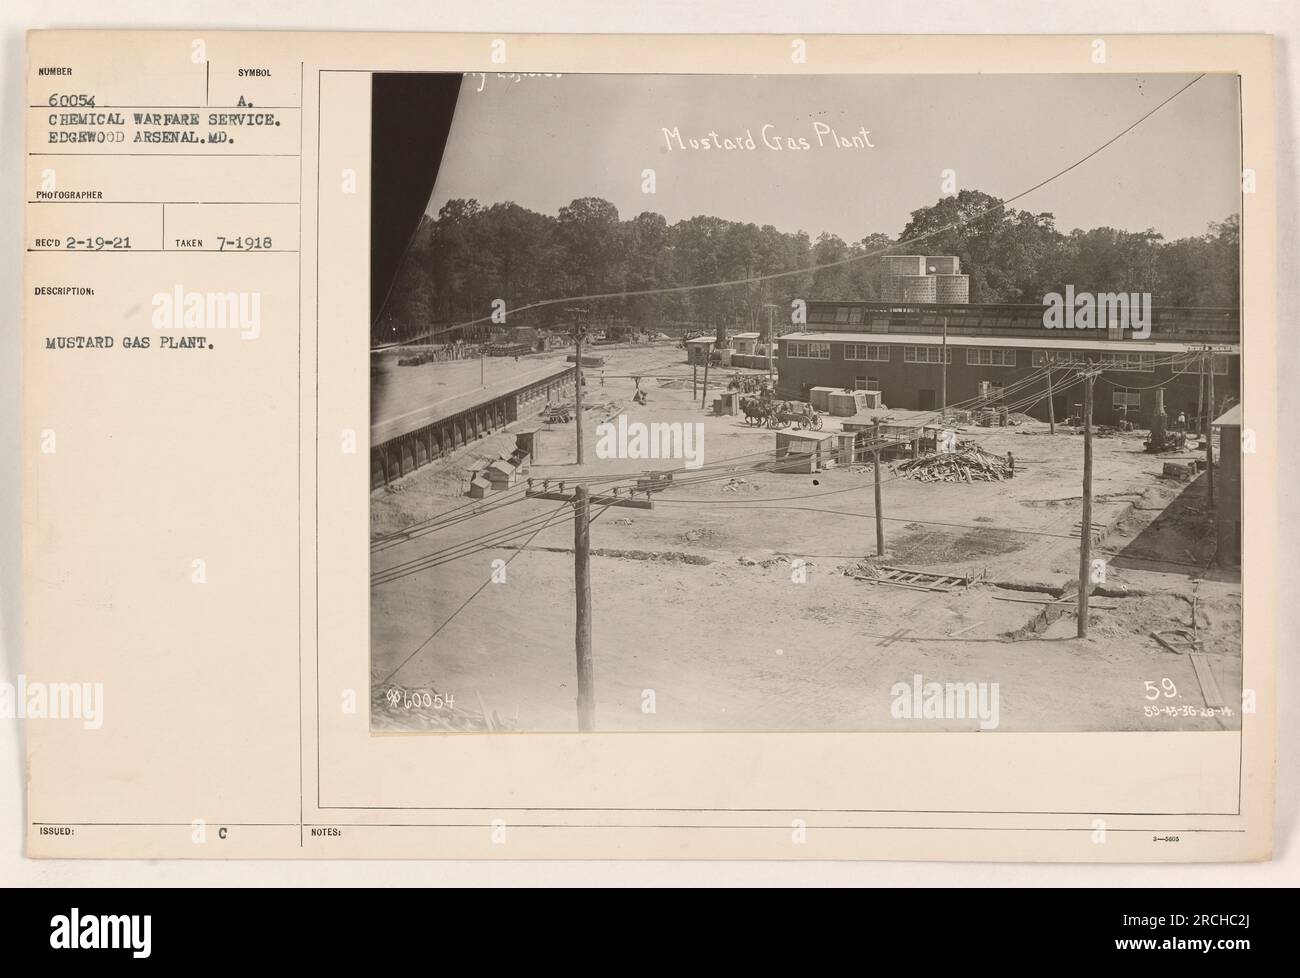 A photograph of a mustard gas plant at Edgewood Arsenal, MD, taken in July 1918. The image shows Symbol Number 60054 A, which is a part of the Chemical Warfare Service. The photograph was received on February 19, 1921. The description notes that this is the Mustard Gas Plant 59, with additional coordinates indicating its location. Stock Photo